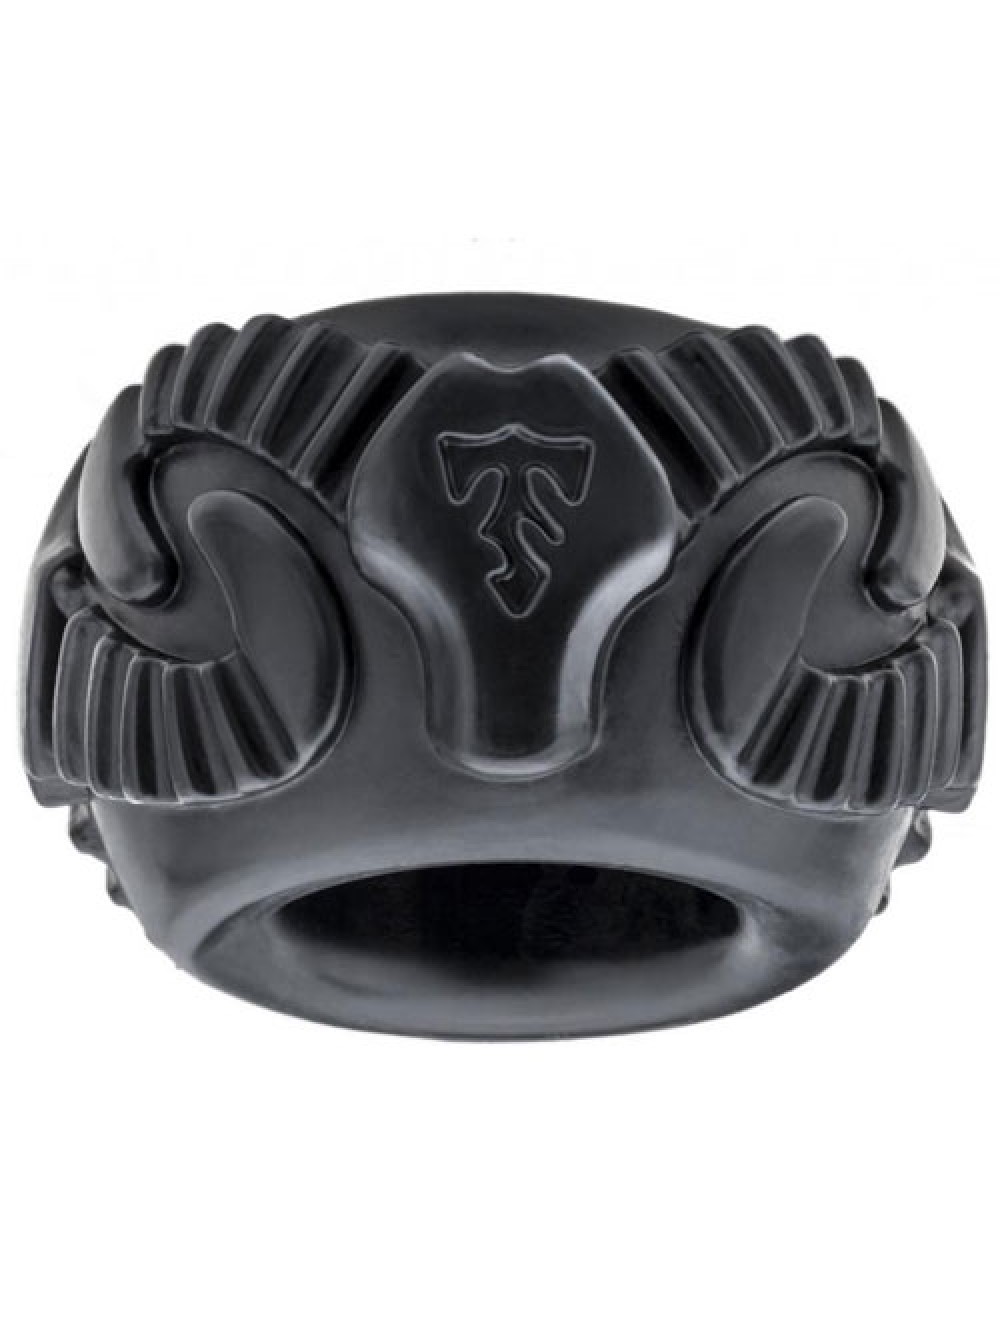 Perfect Fit Tribal Son Ram Ring 2 Pack Black